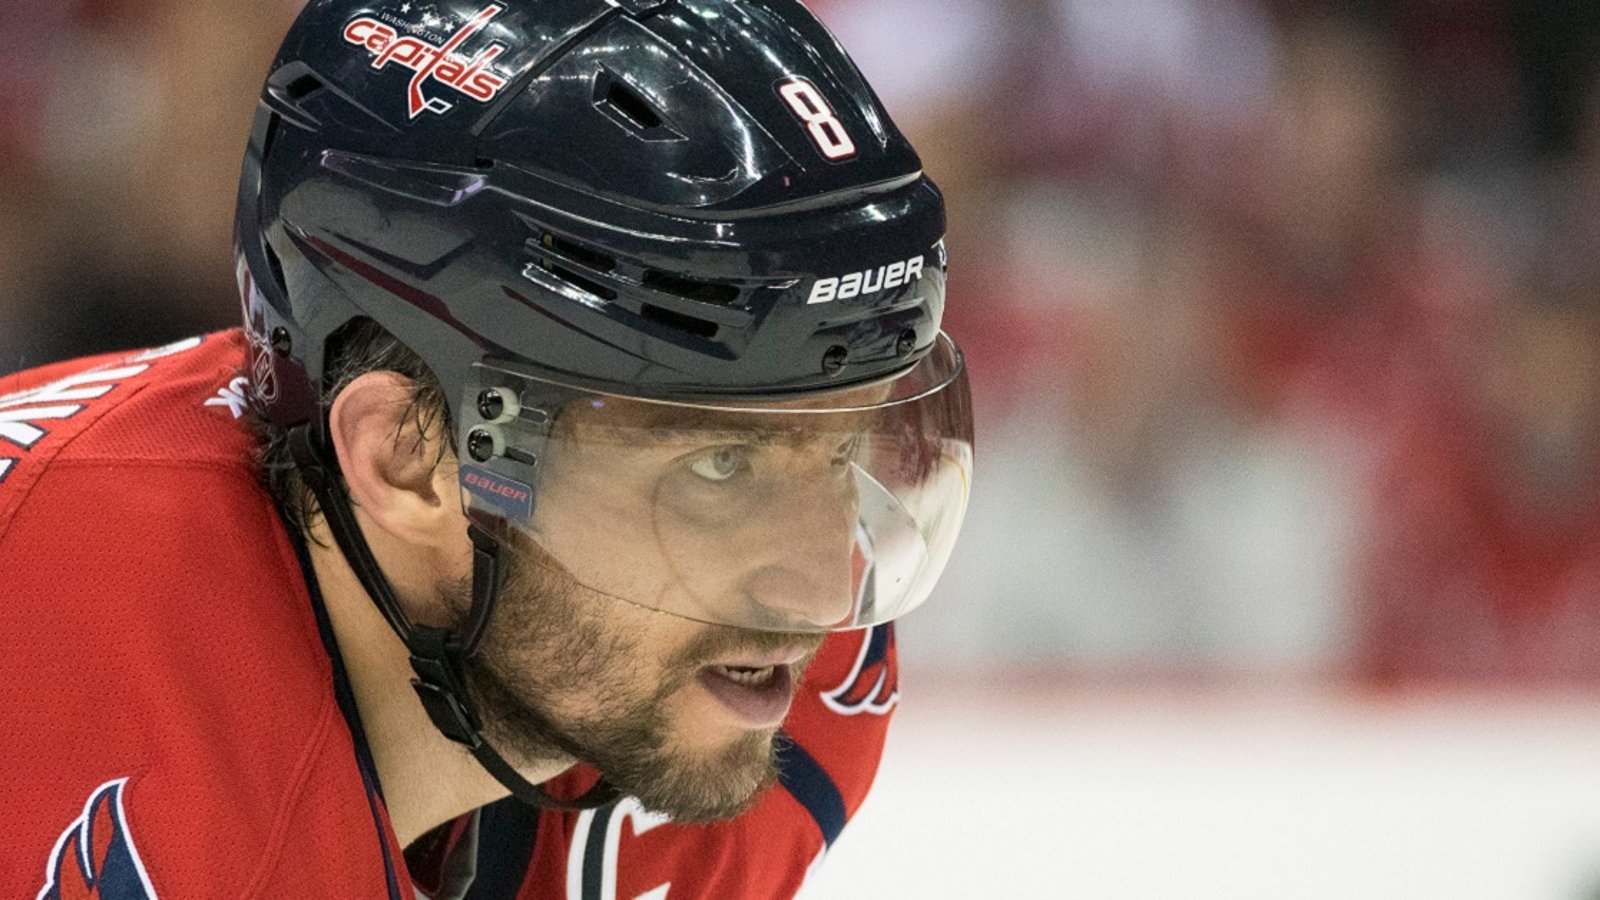 Alex Ovechkin reveals the team he cheered for growing up.